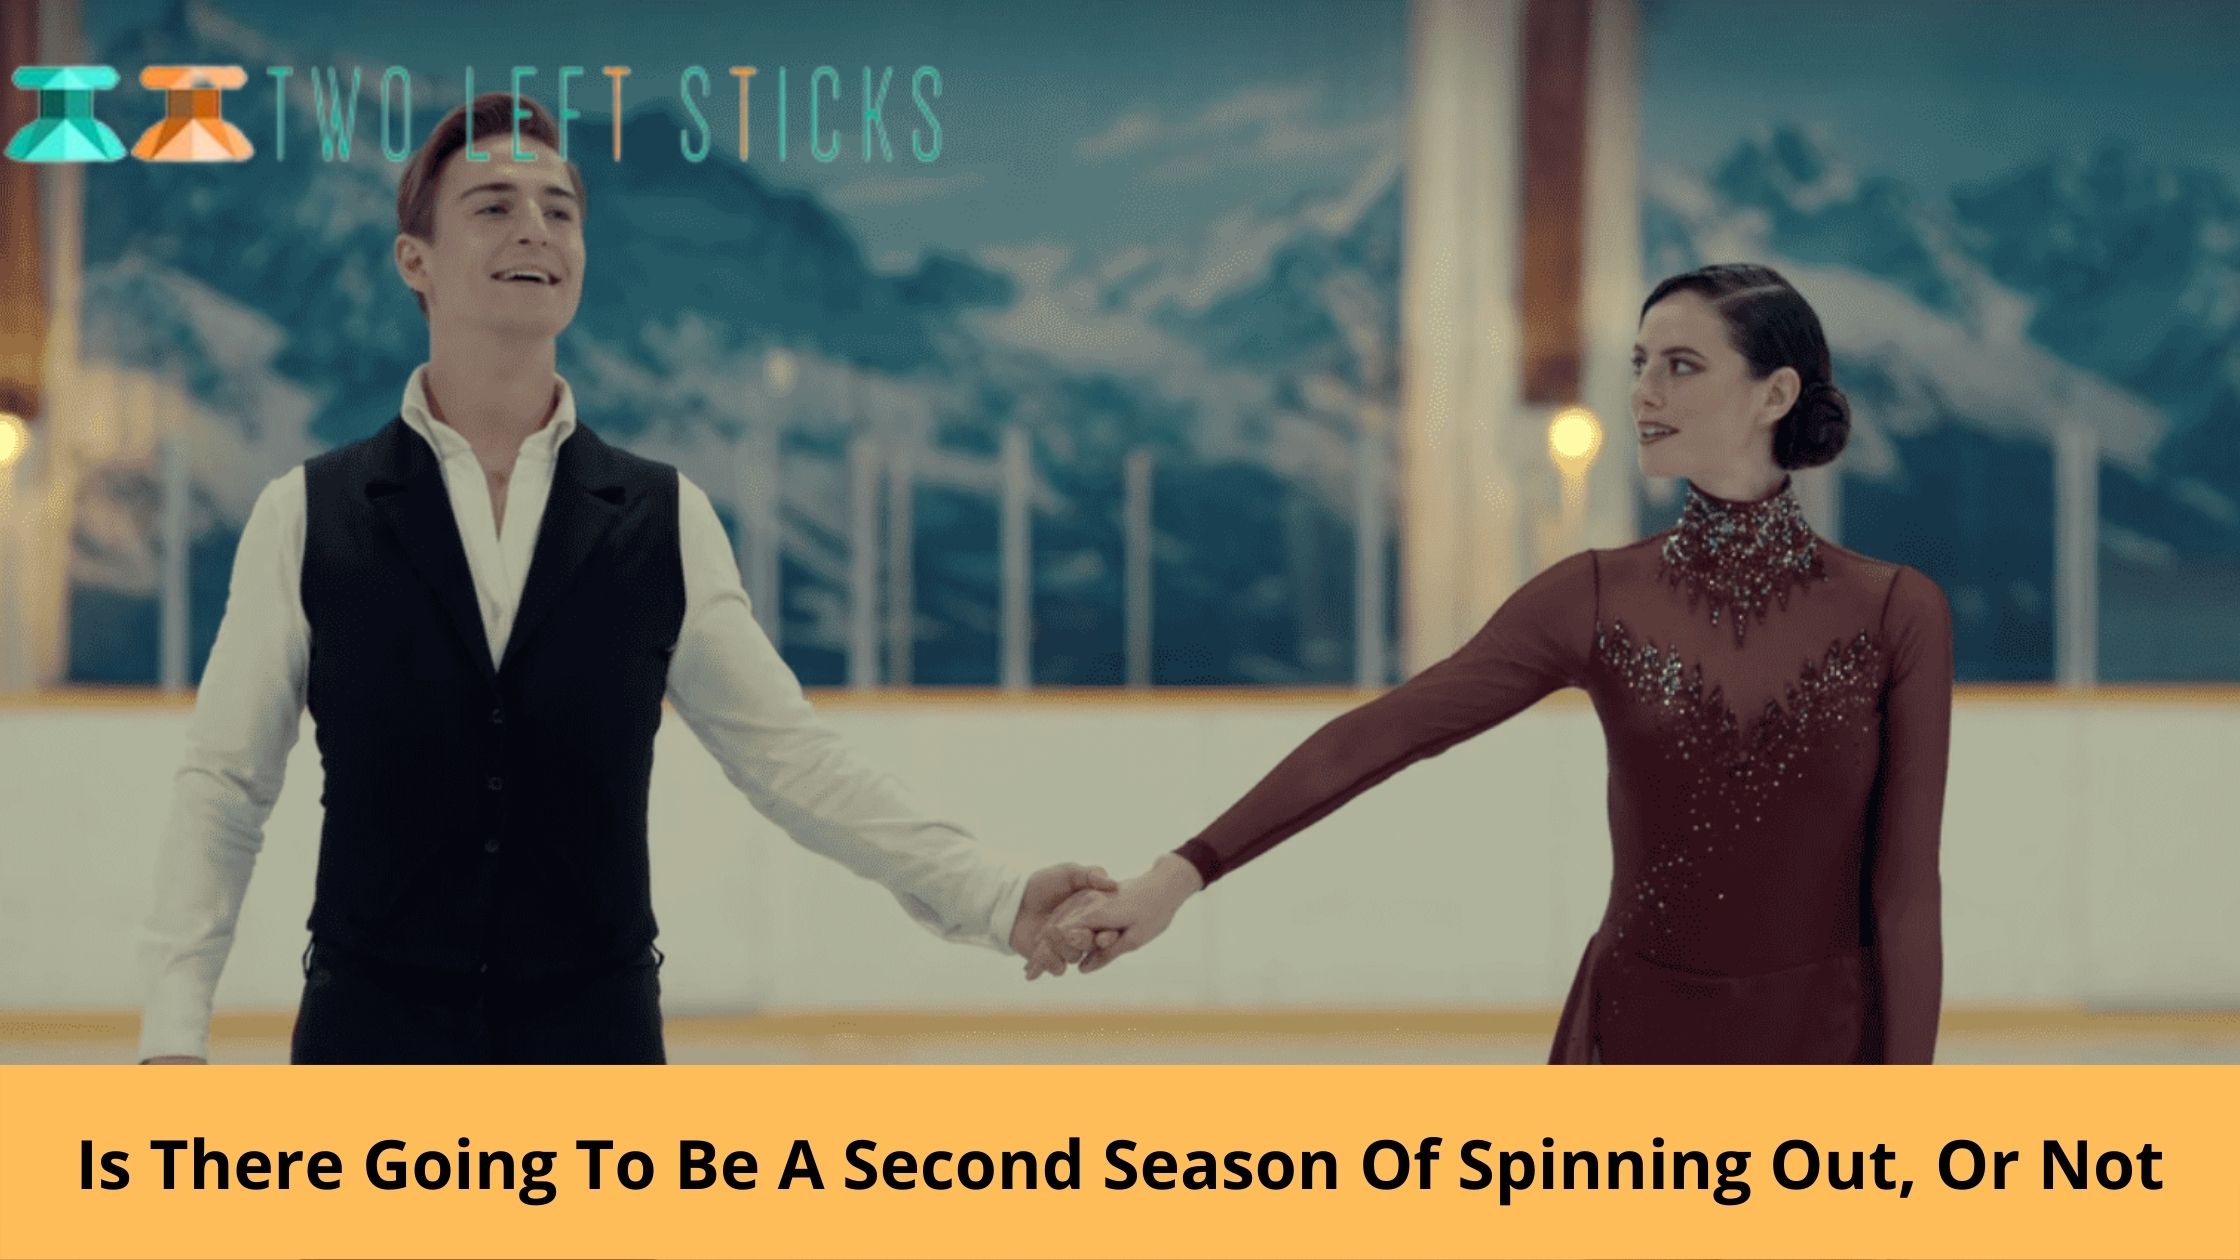 Is There Going To Be A Second Season Of Spinning Out, Or Not-twoleftsticks(1)